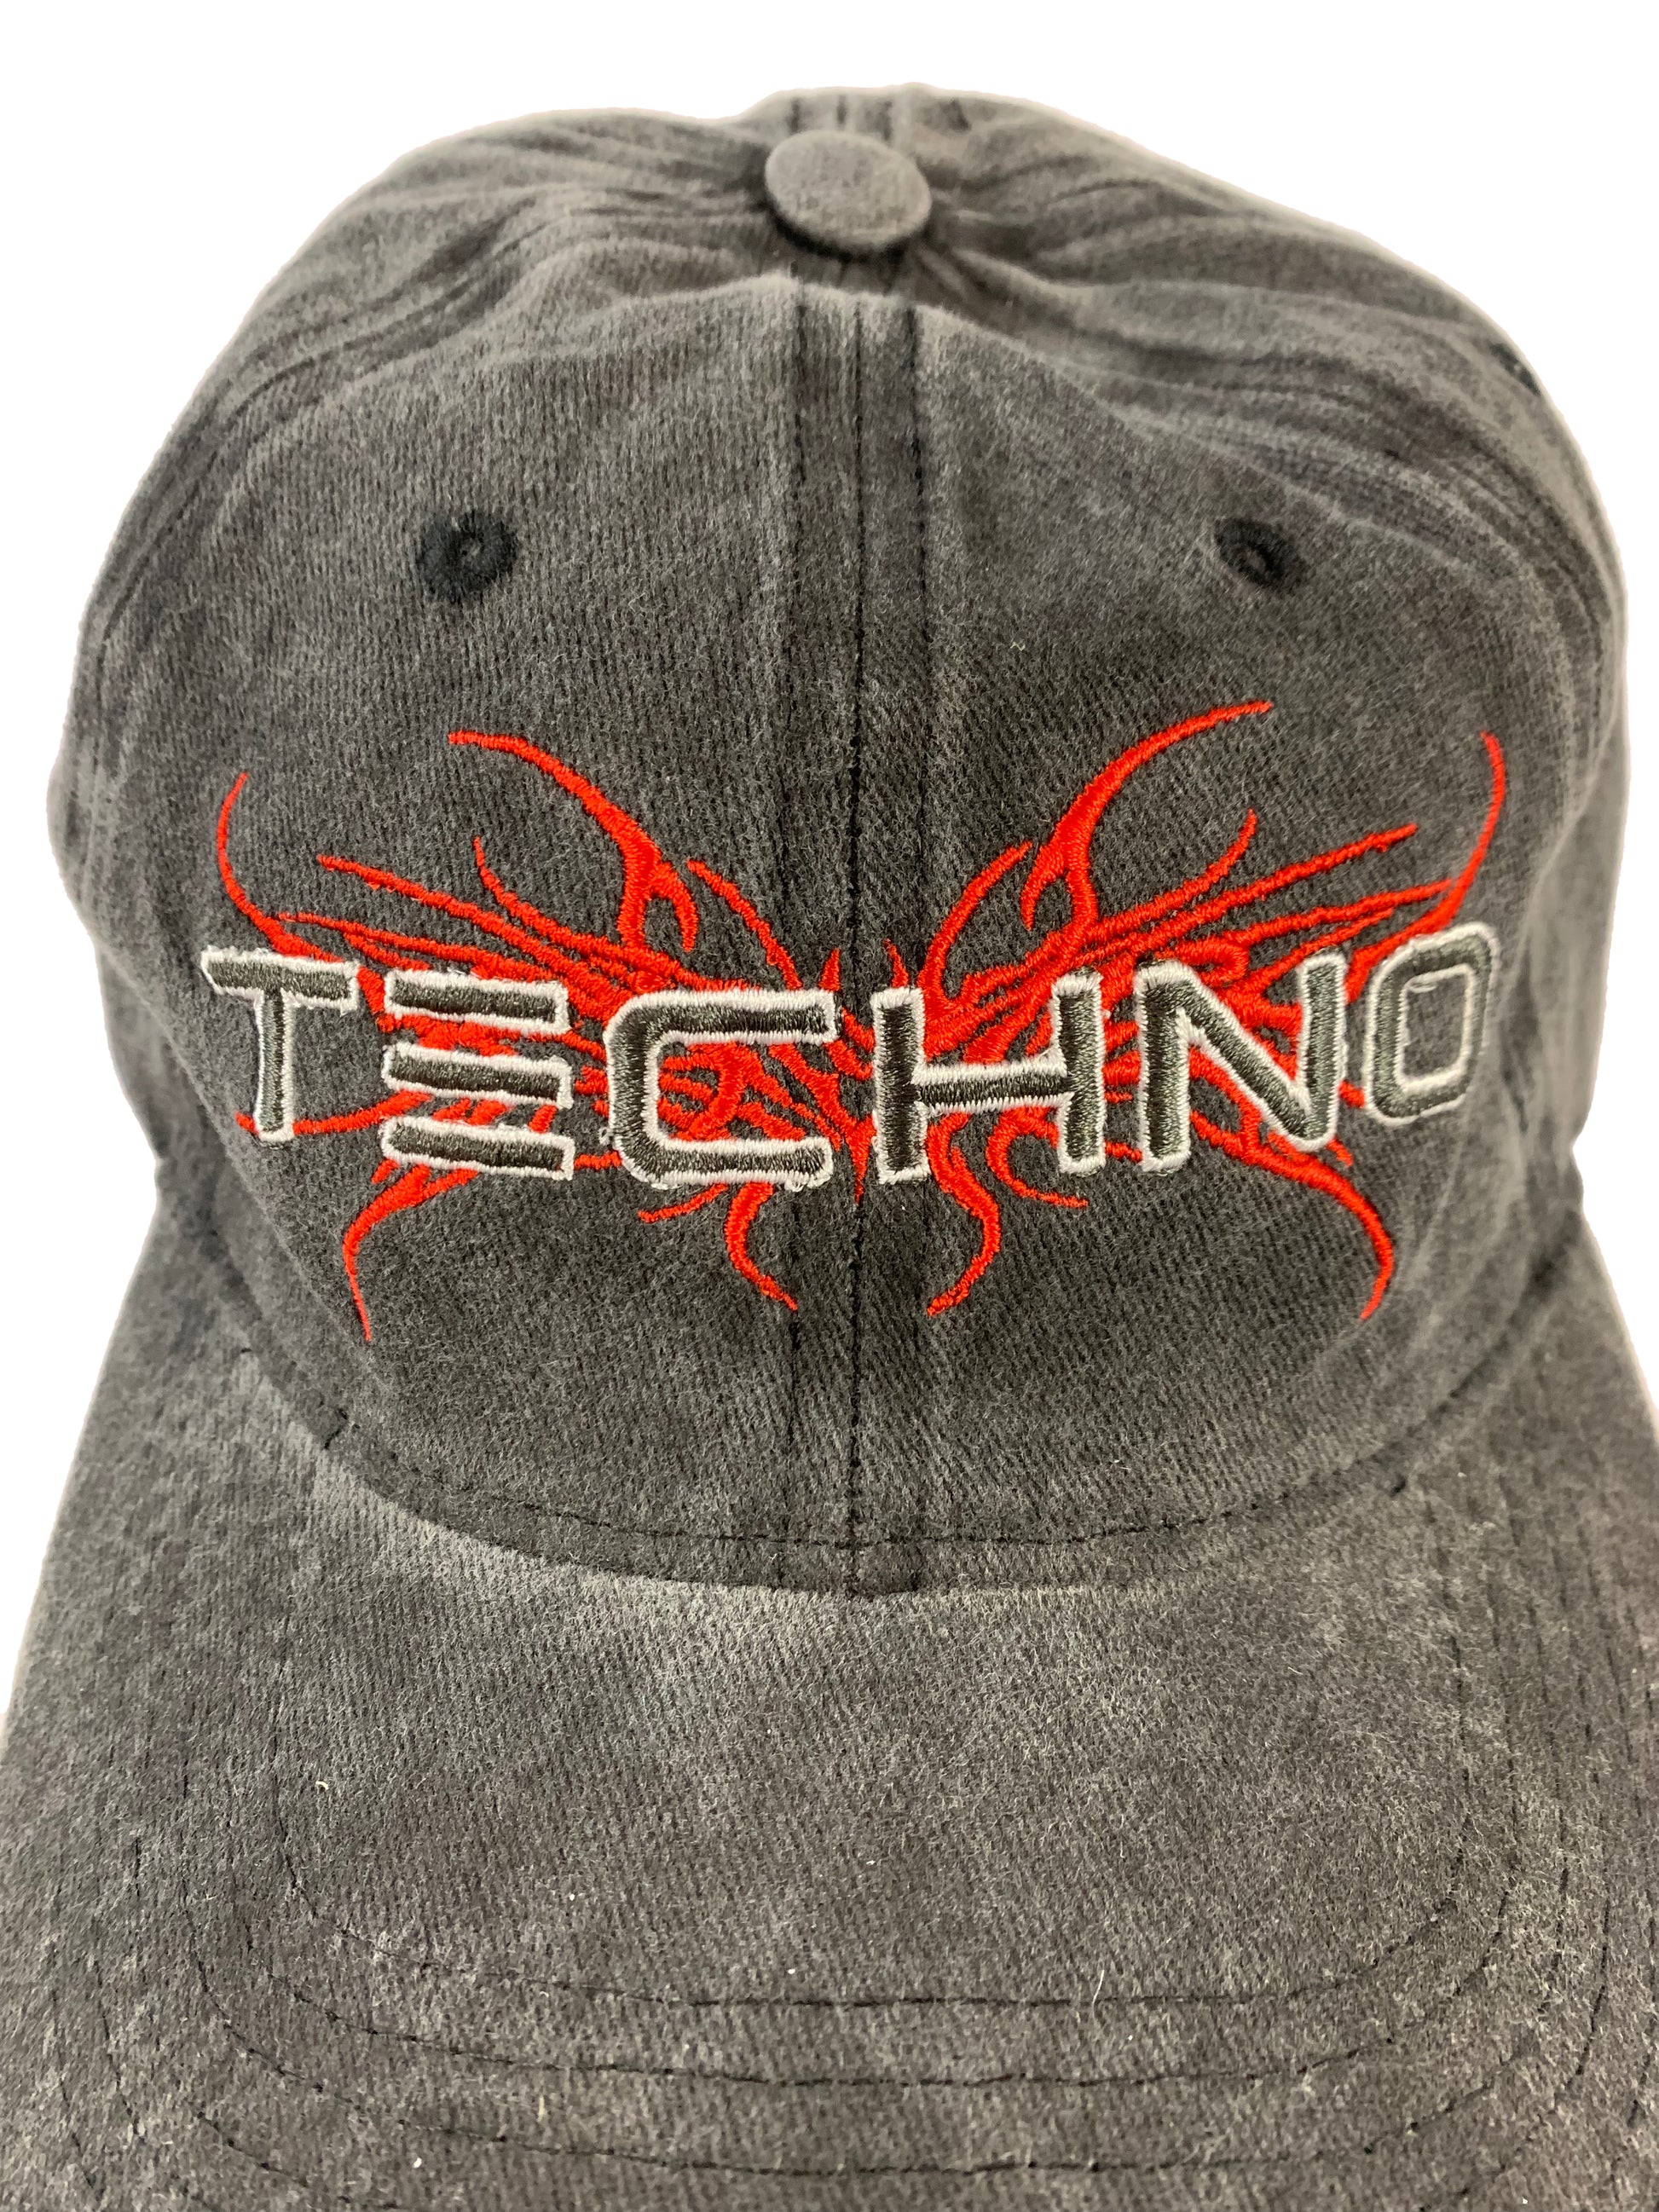 Acid washed black cap embrodery techno and tribal This bold cap is the perfect accessory to make a statement. Its acid-washed black base exudes a stylish, contemporary vibe while the embroidered TECHNO and tribal designs bring a rave touch